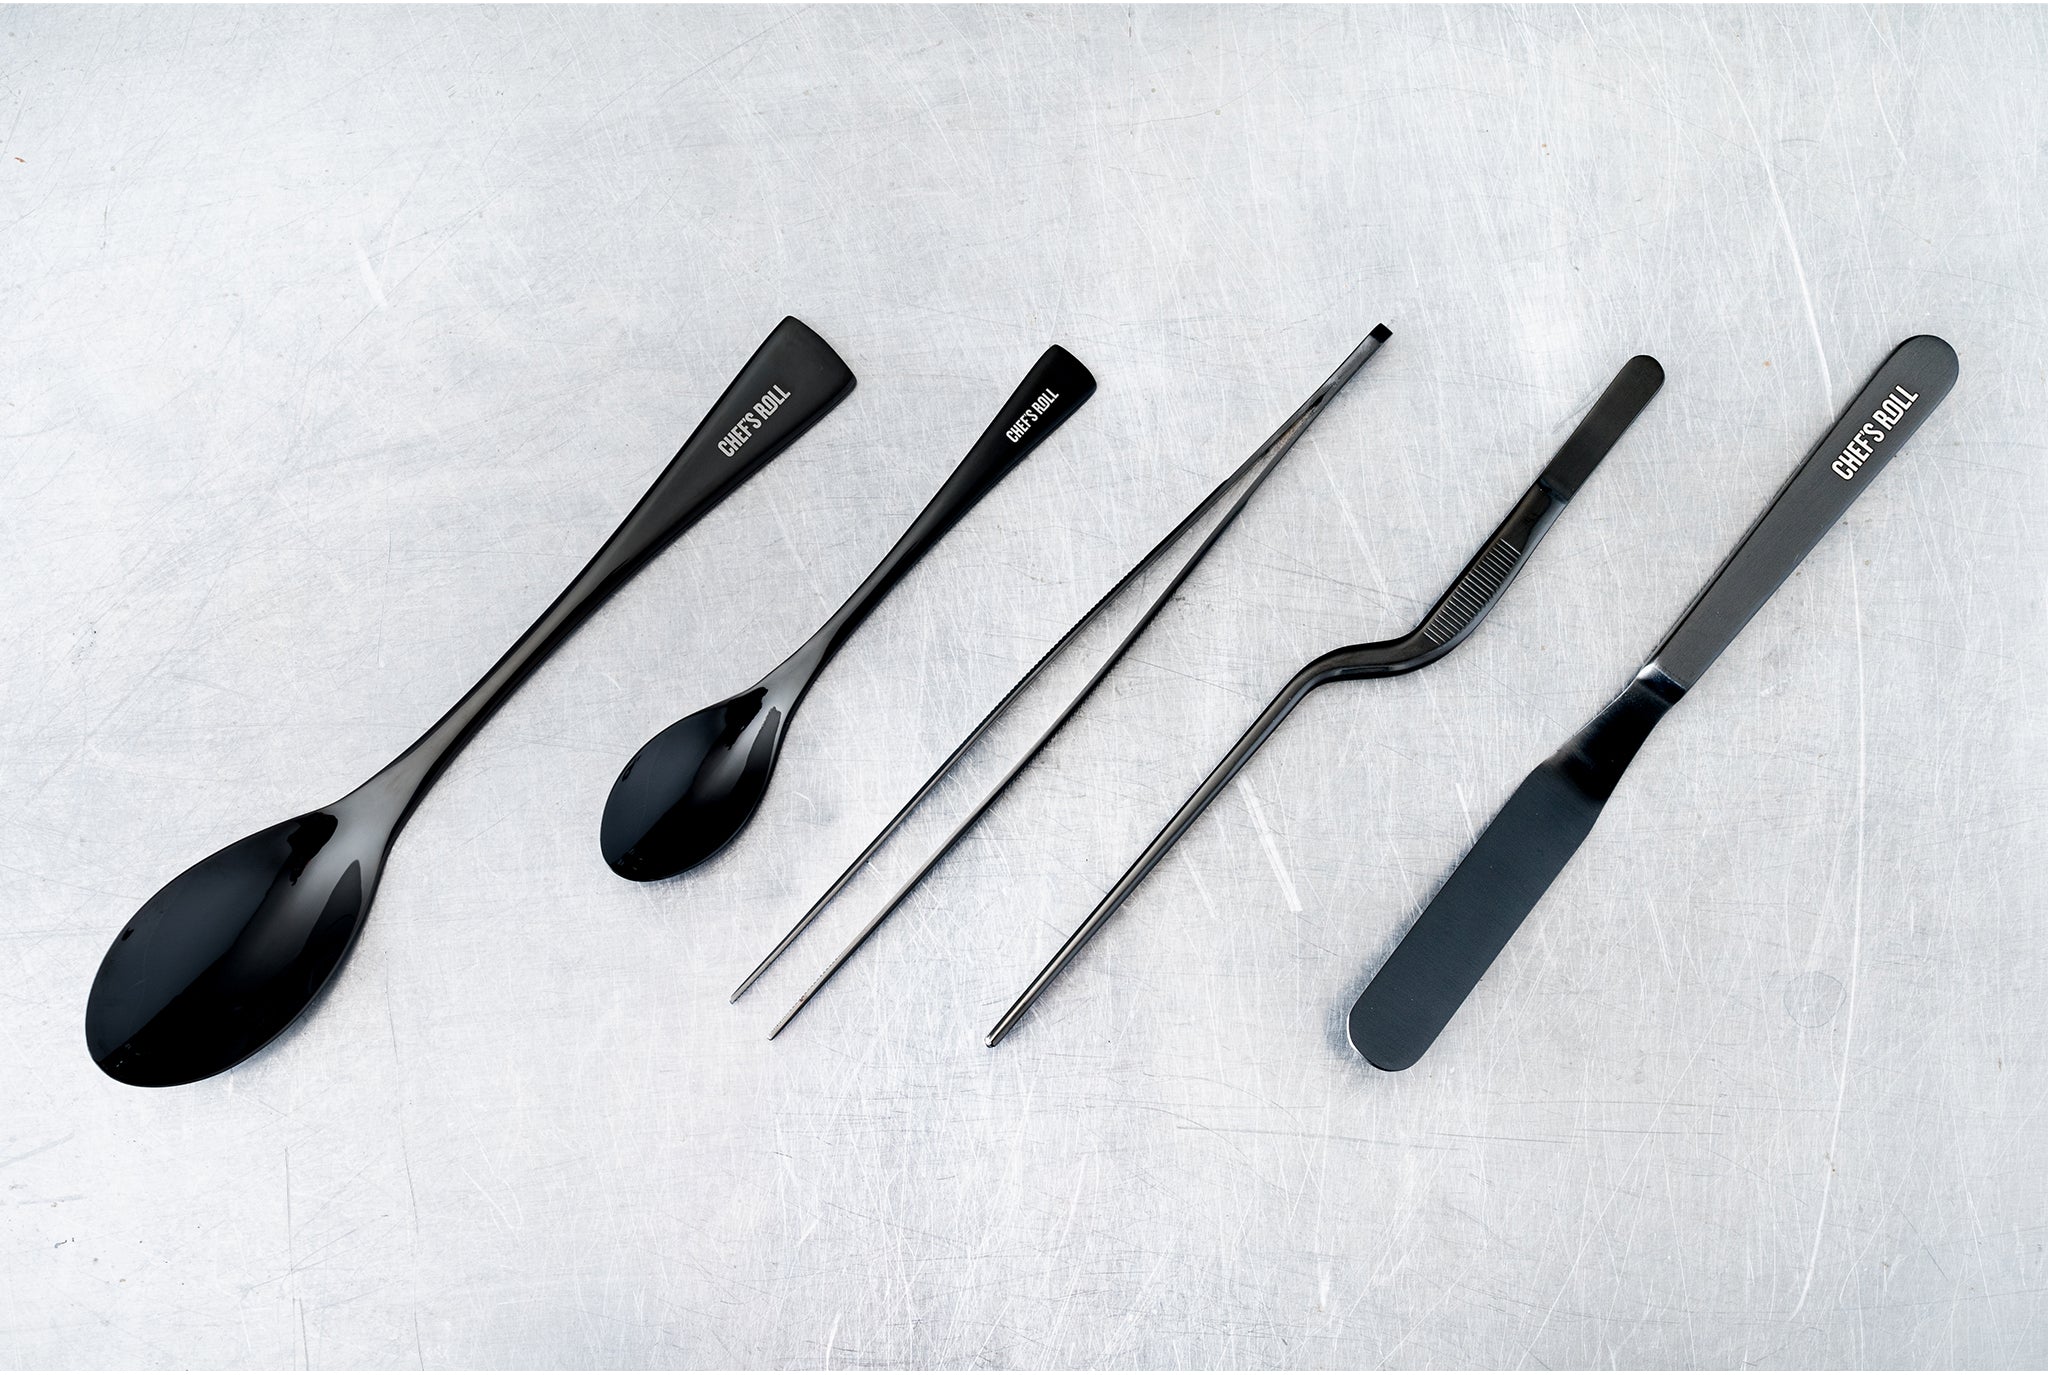 5 Piece Set of Plating Tools – Chef's Roll Apparel